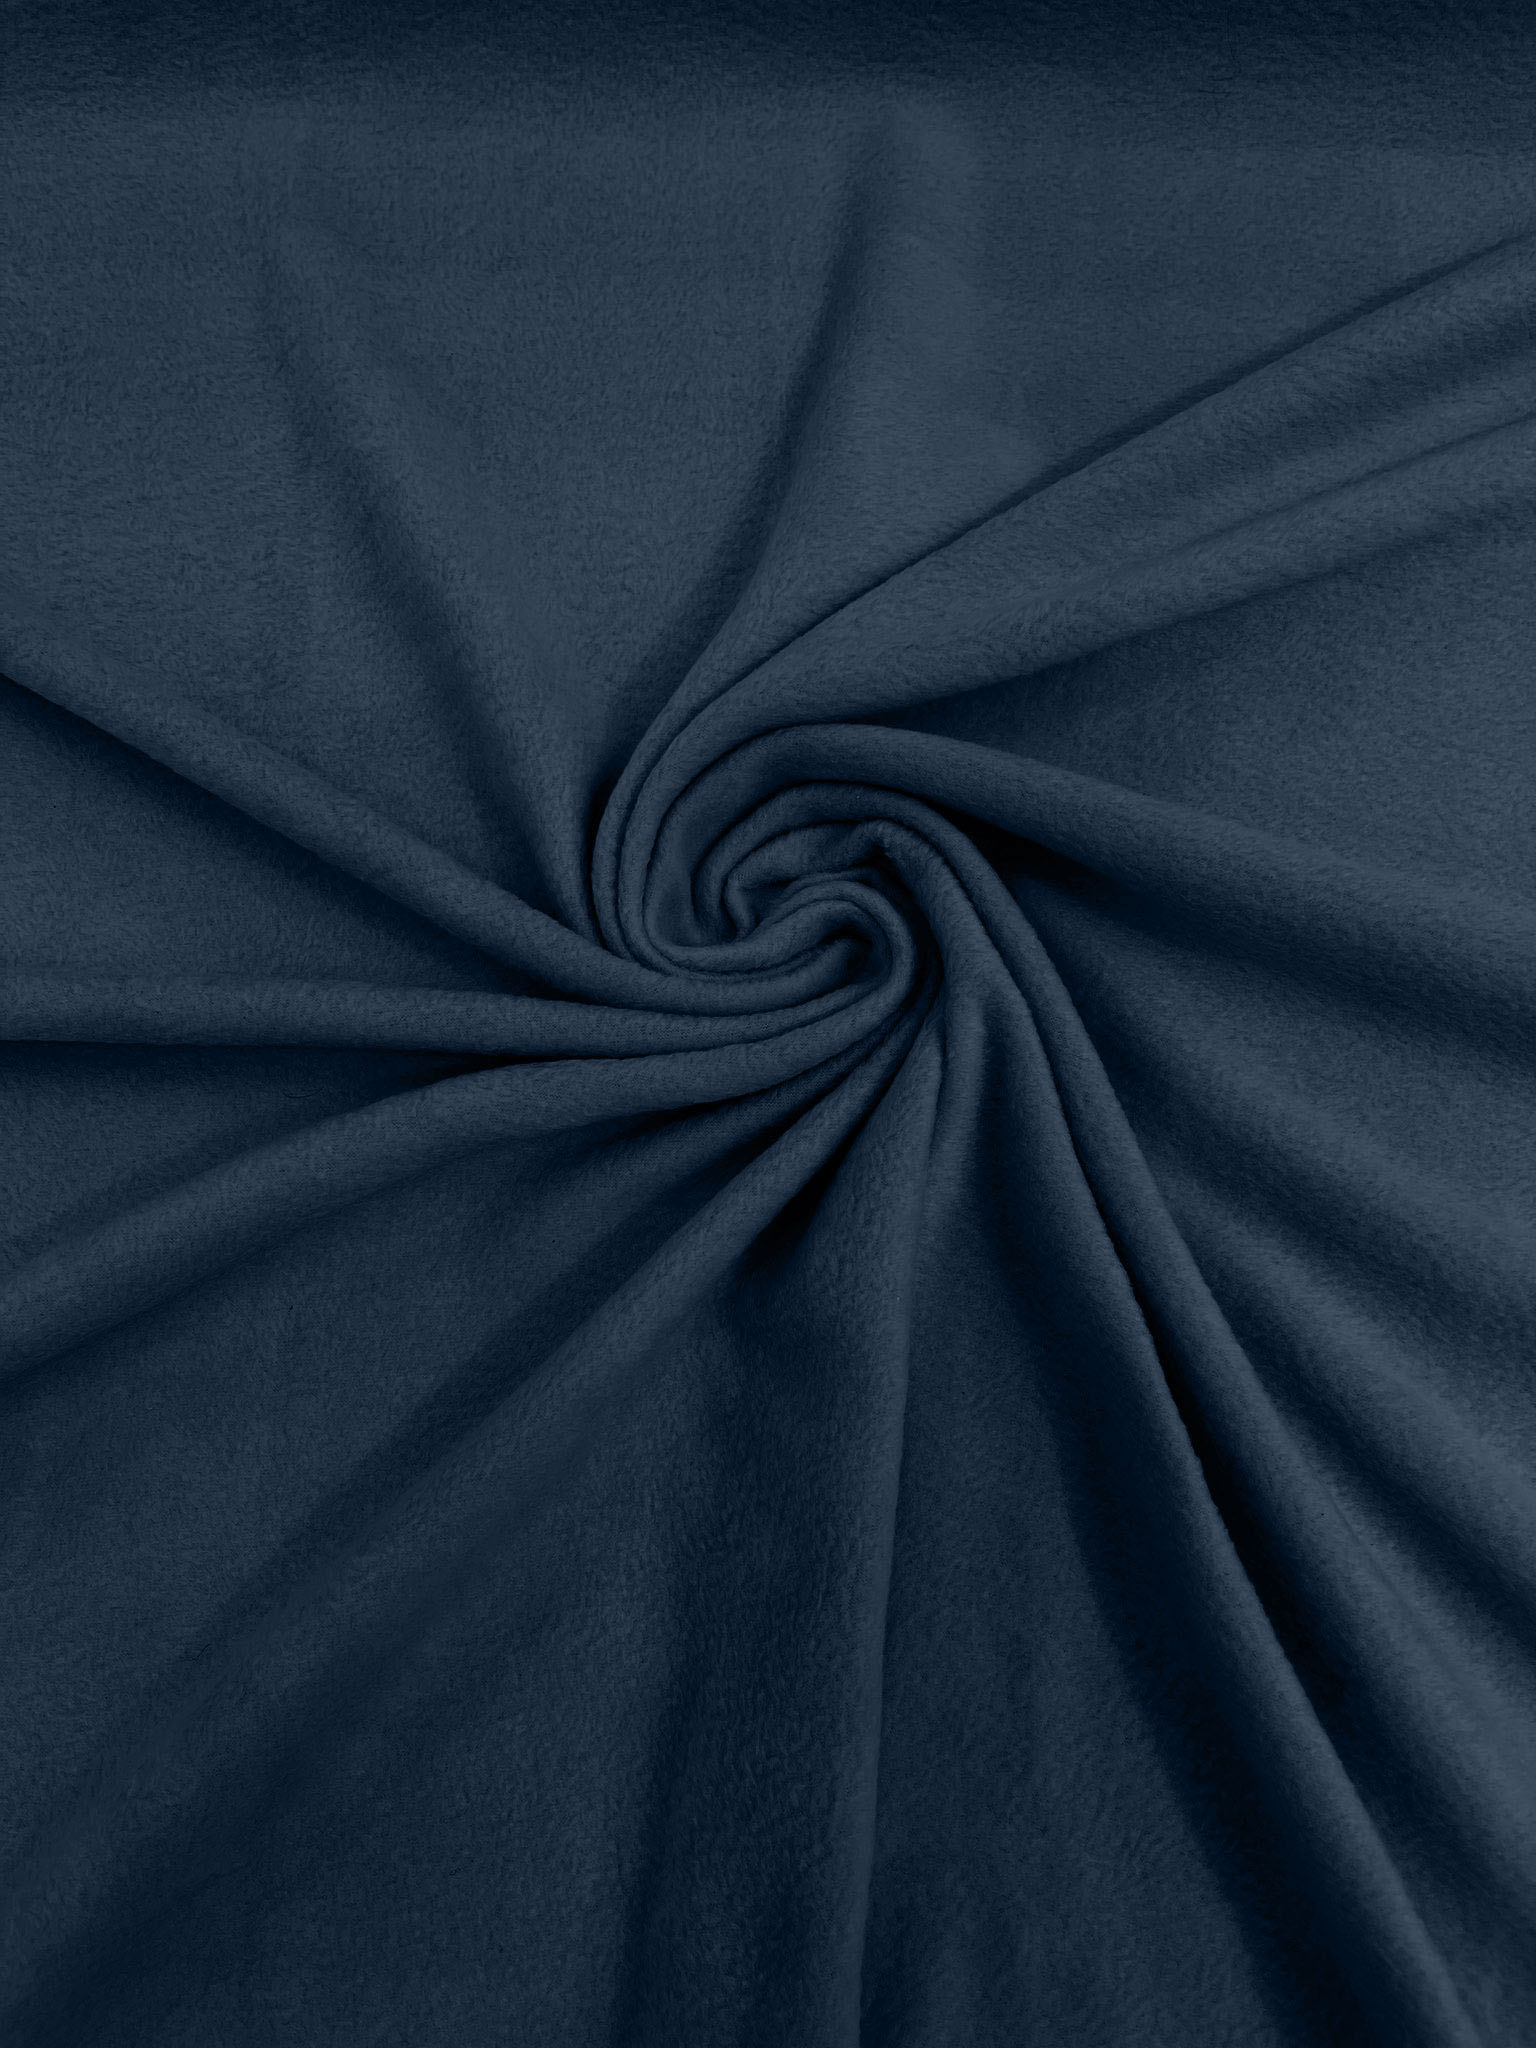 Coppen Blue Solid Polar Fleece Fabric Anti-Pill 58" Wide Sold by The Yard